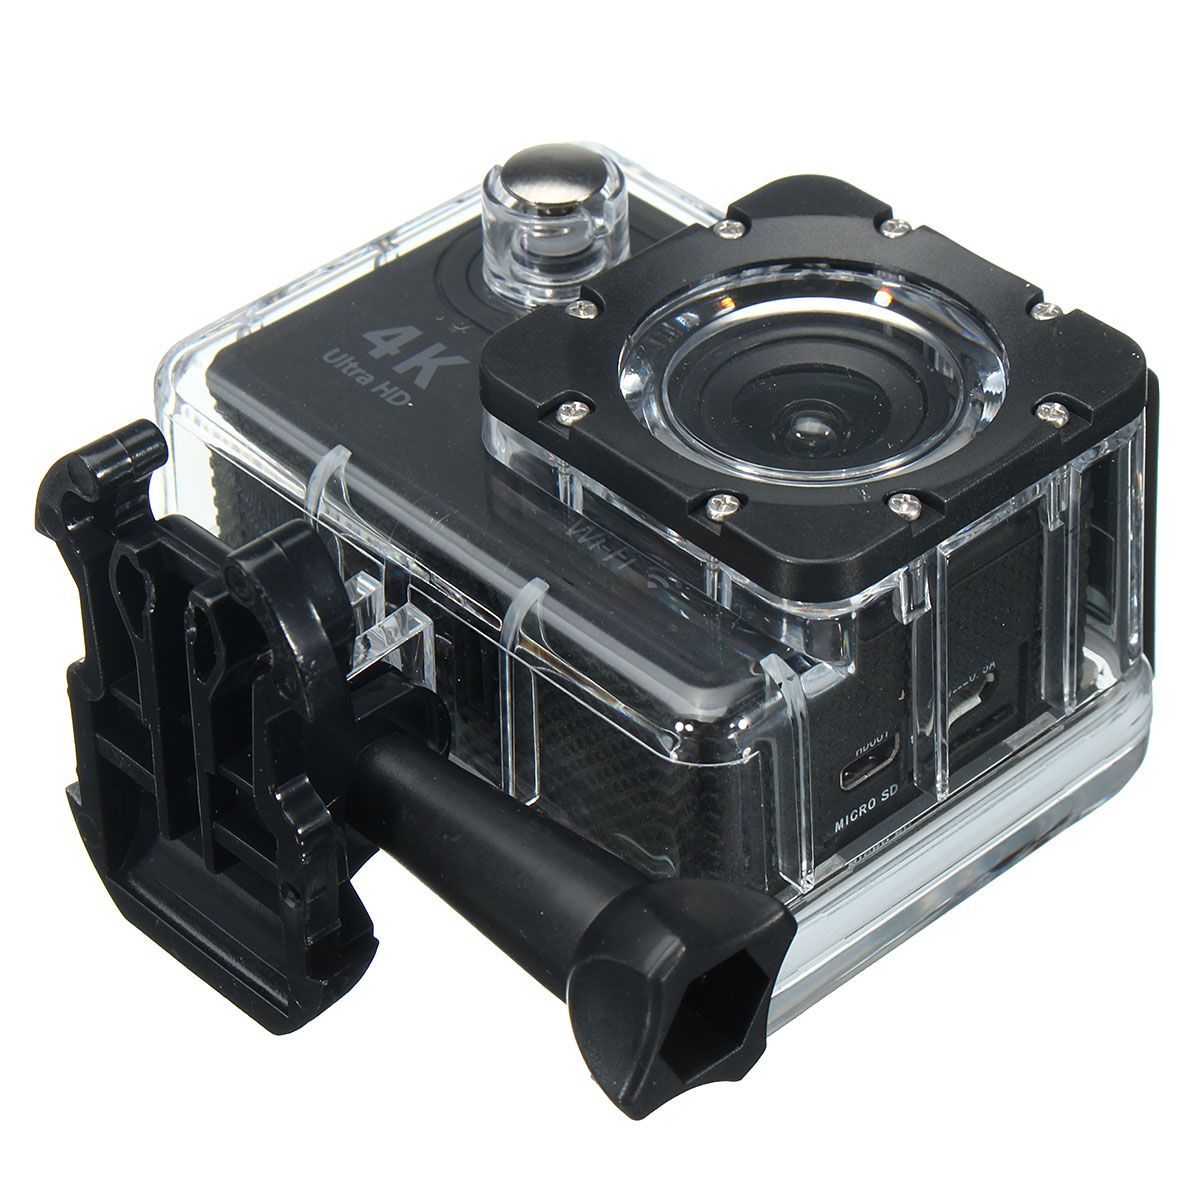 H9-1080P-HD-Waterproof-WIFI-Wide-Angle-Action-Sport-Camera-for-Swimming-Hiking-Climbing-1639179